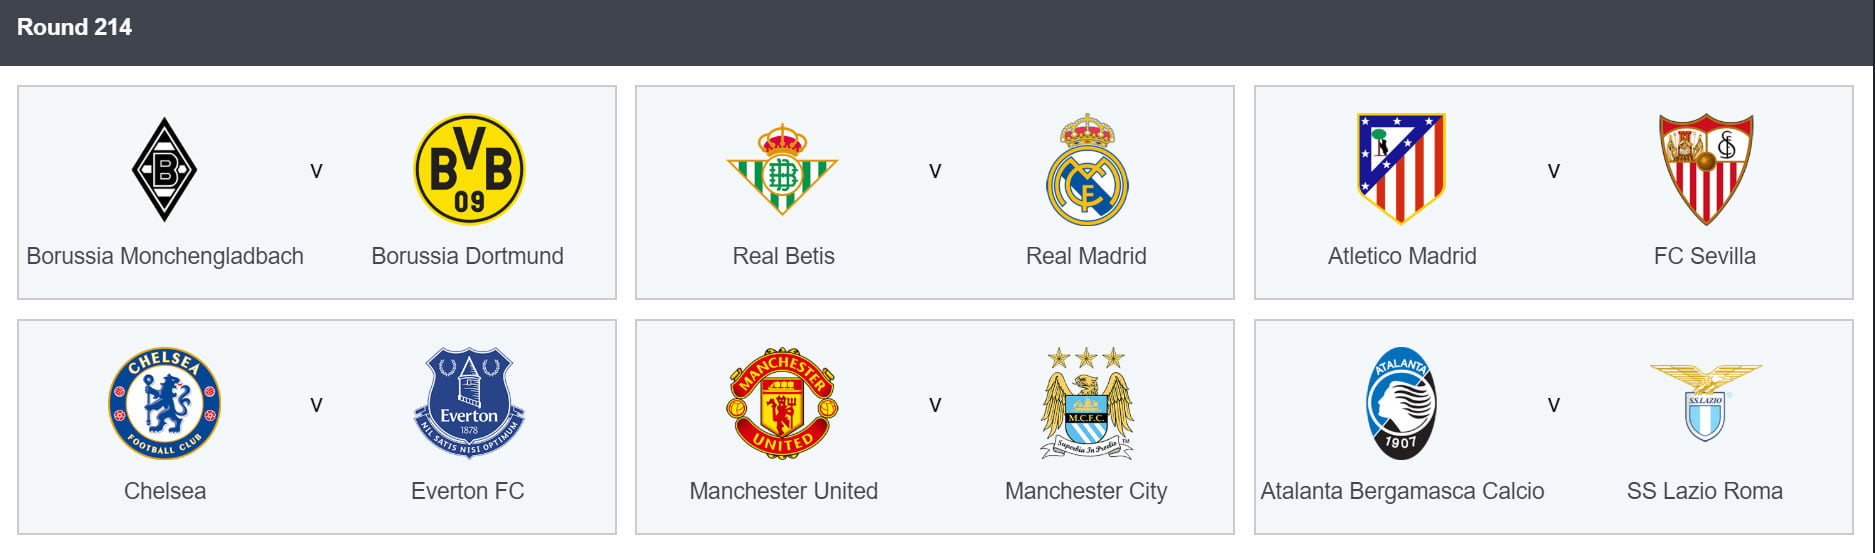 super9ja matches round 214 predict the score of all 6 matches and enter for free to win